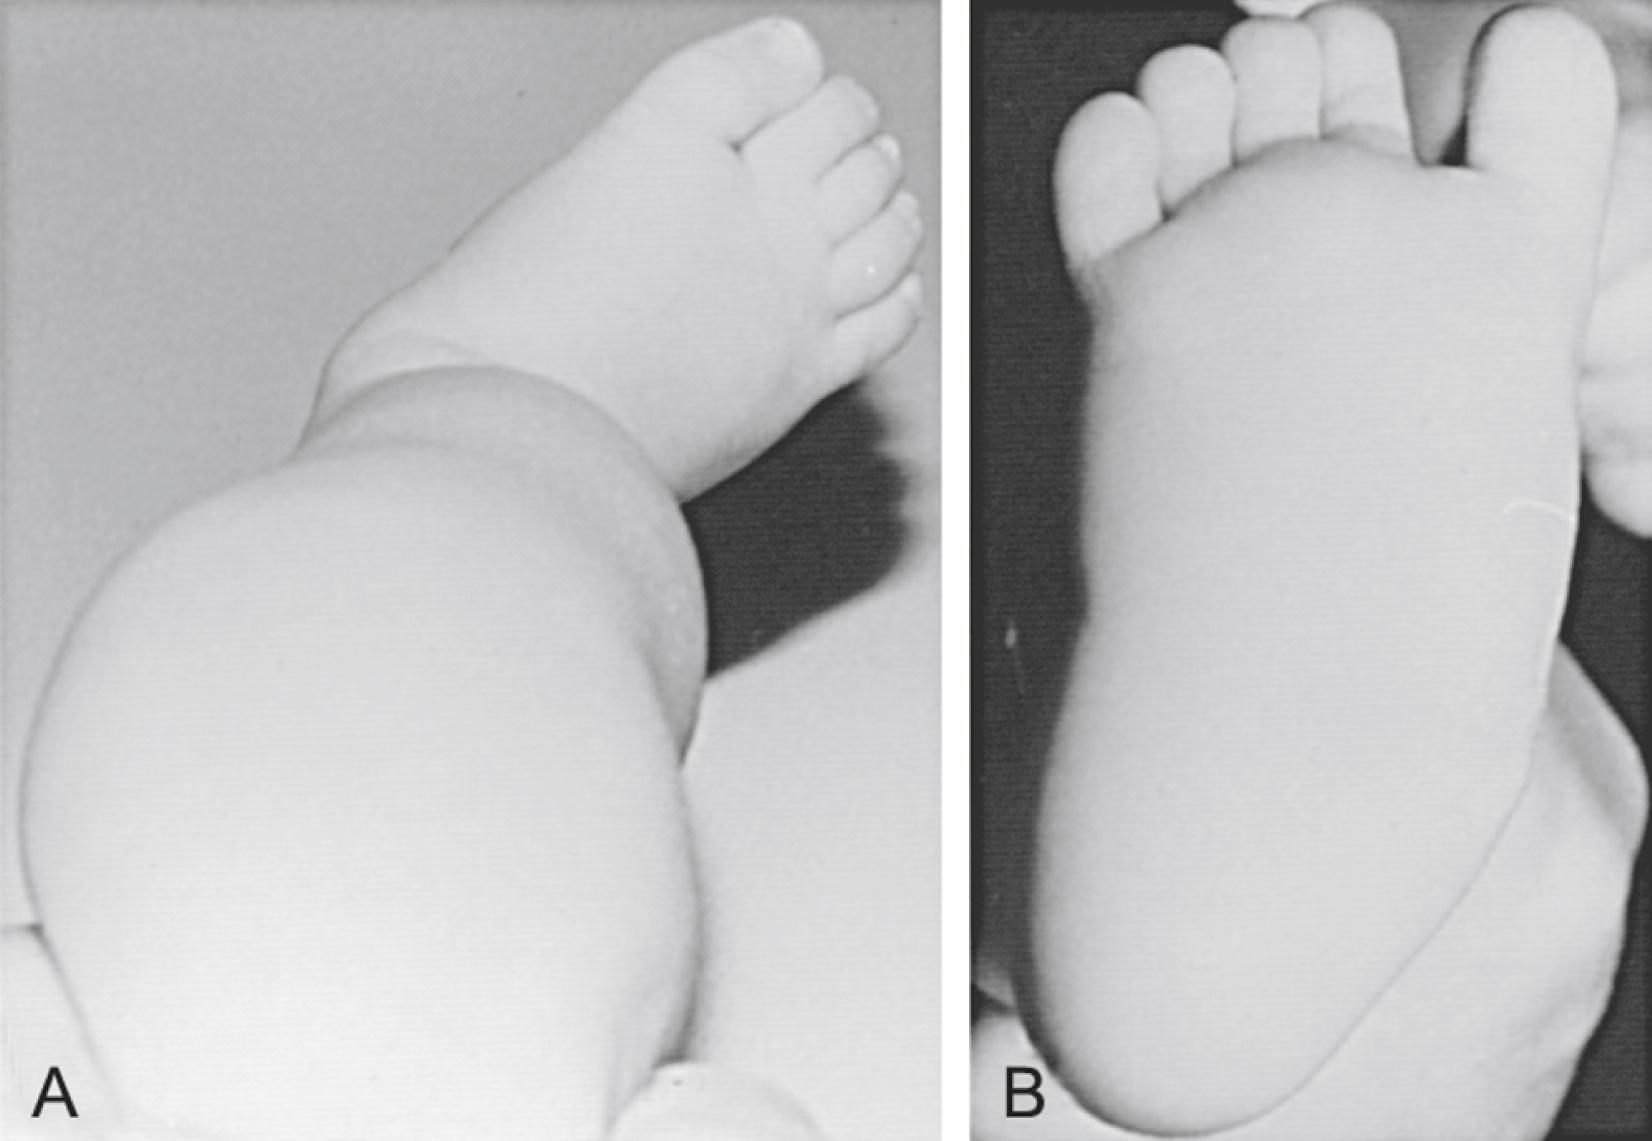 Fig. 45.10, A, A clinical photograph of a 2-month-old girl demonstrating excessive external tibial torsion. This reverse or anterior thigh-foot angle shows approximately 50 degrees of external tibial torsion. B, A calcaneovalgus foot with forefoot abduction and increased hindfoot valgus in the same infant. There is also hyperdorsiflexibility of the foot in the ankle.